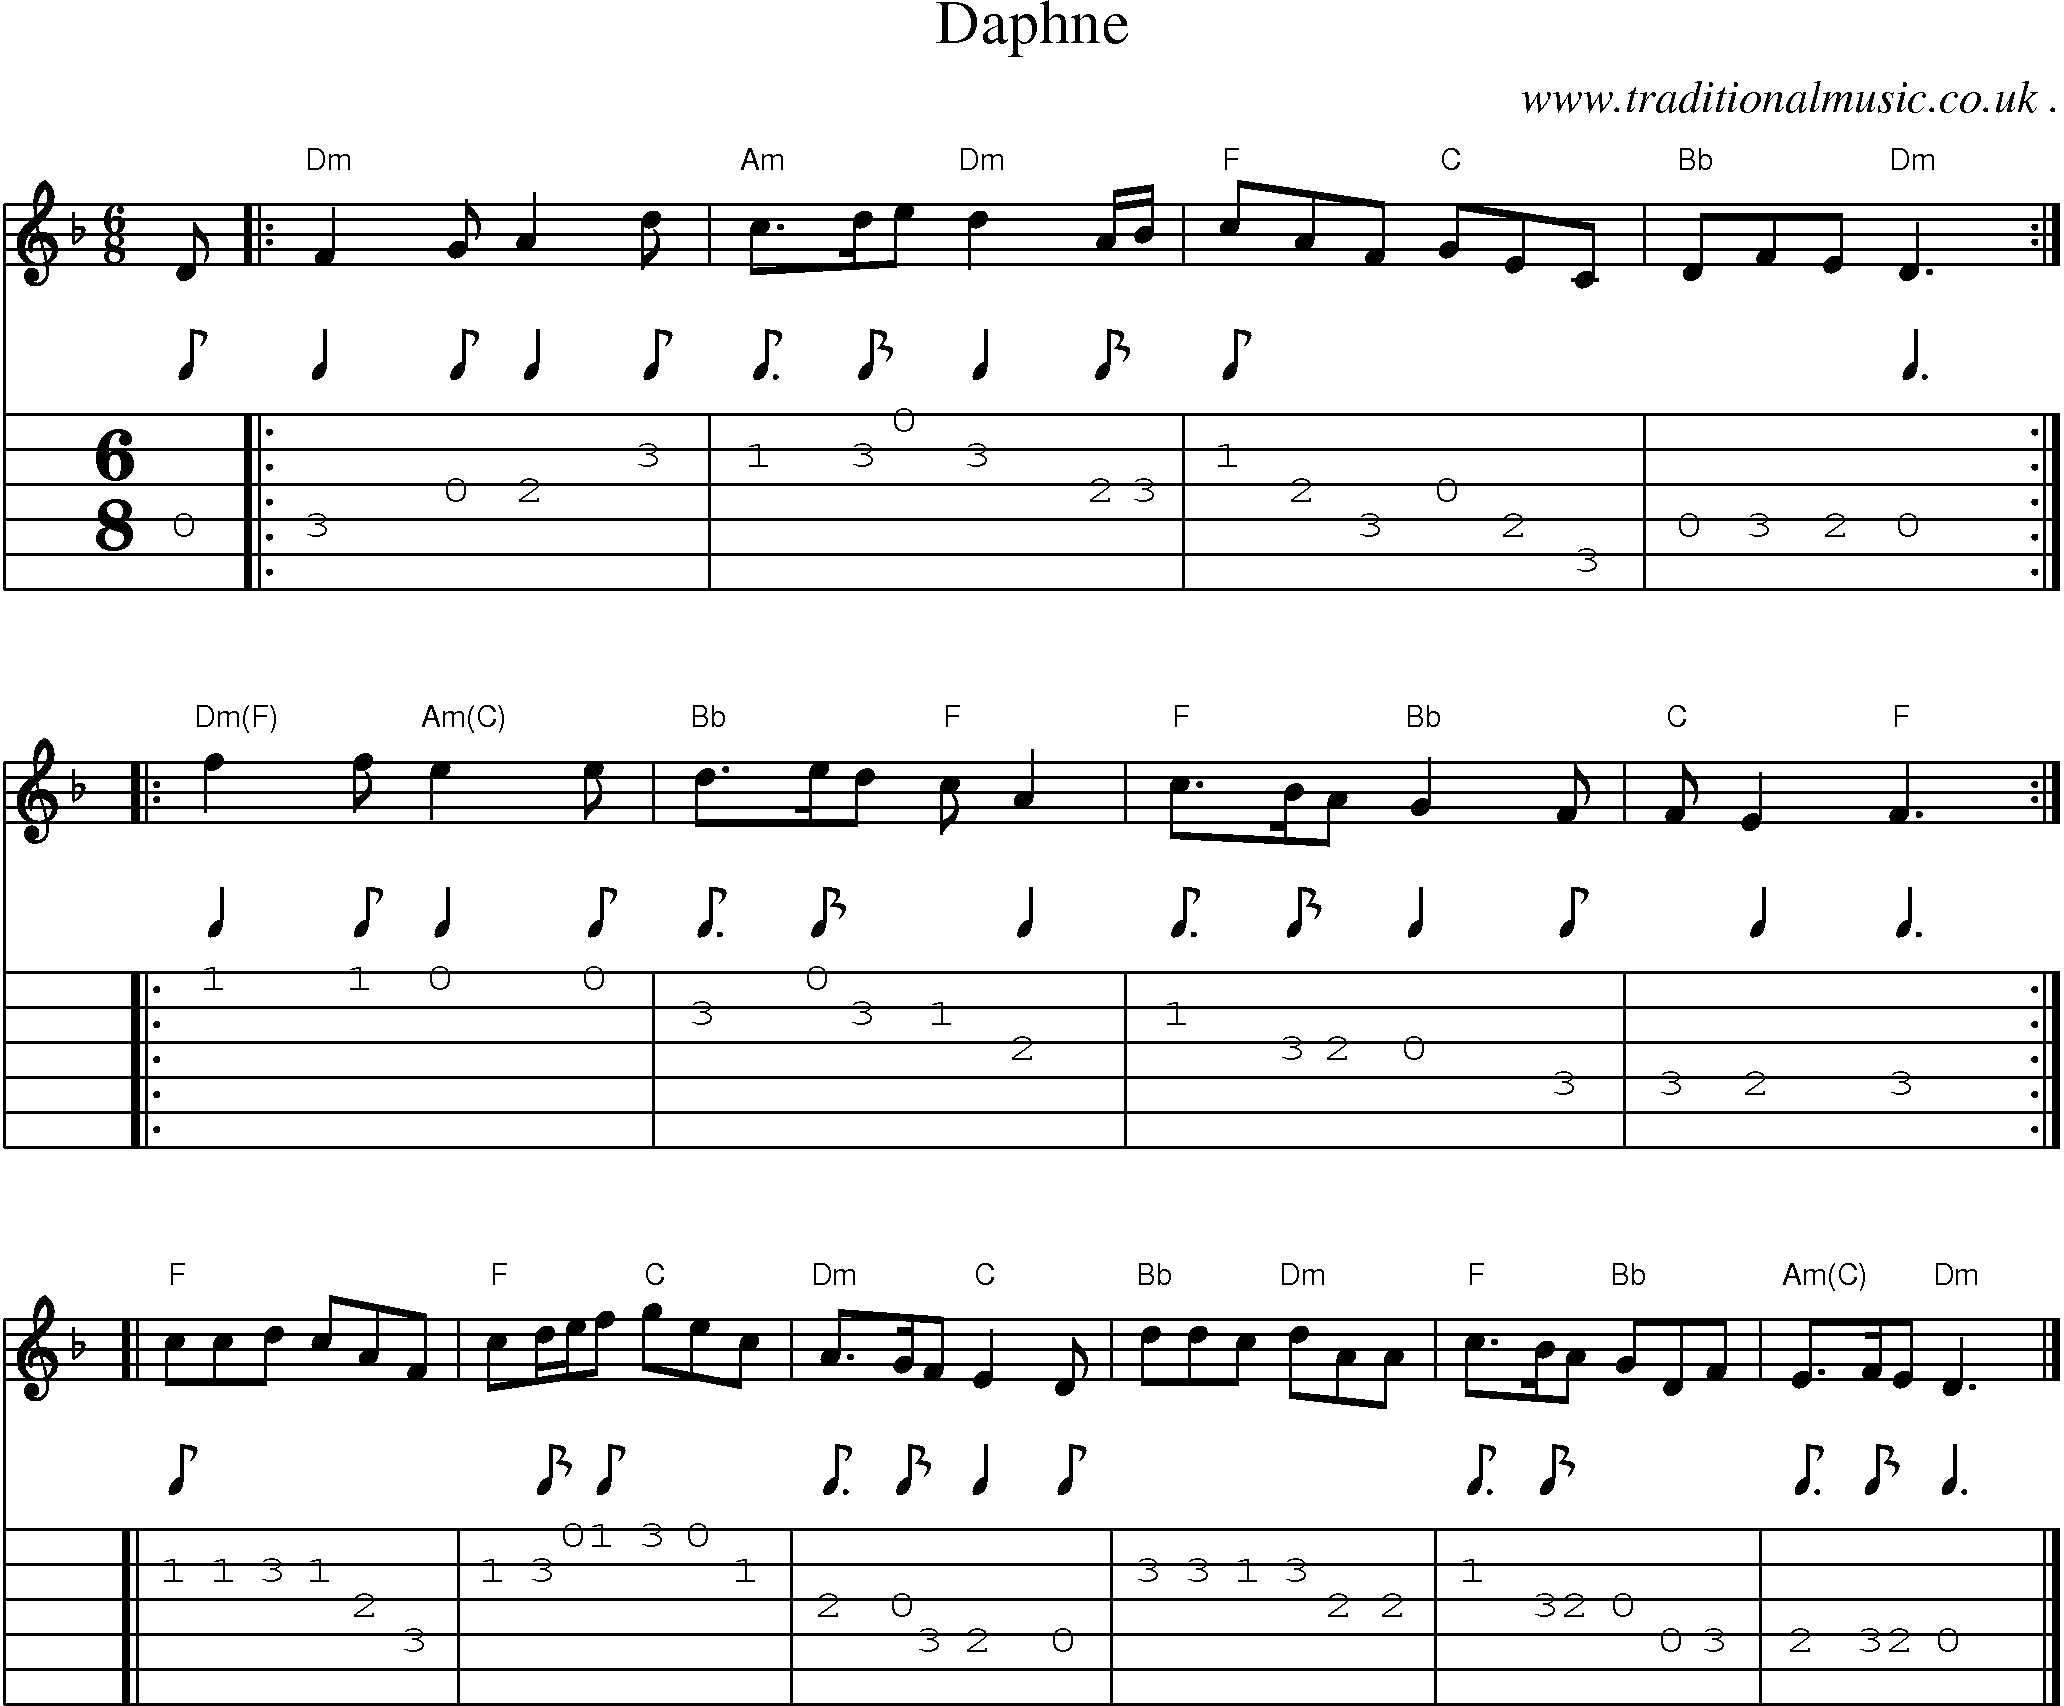 Sheet-music  score, Chords and Guitar Tabs for Daphne